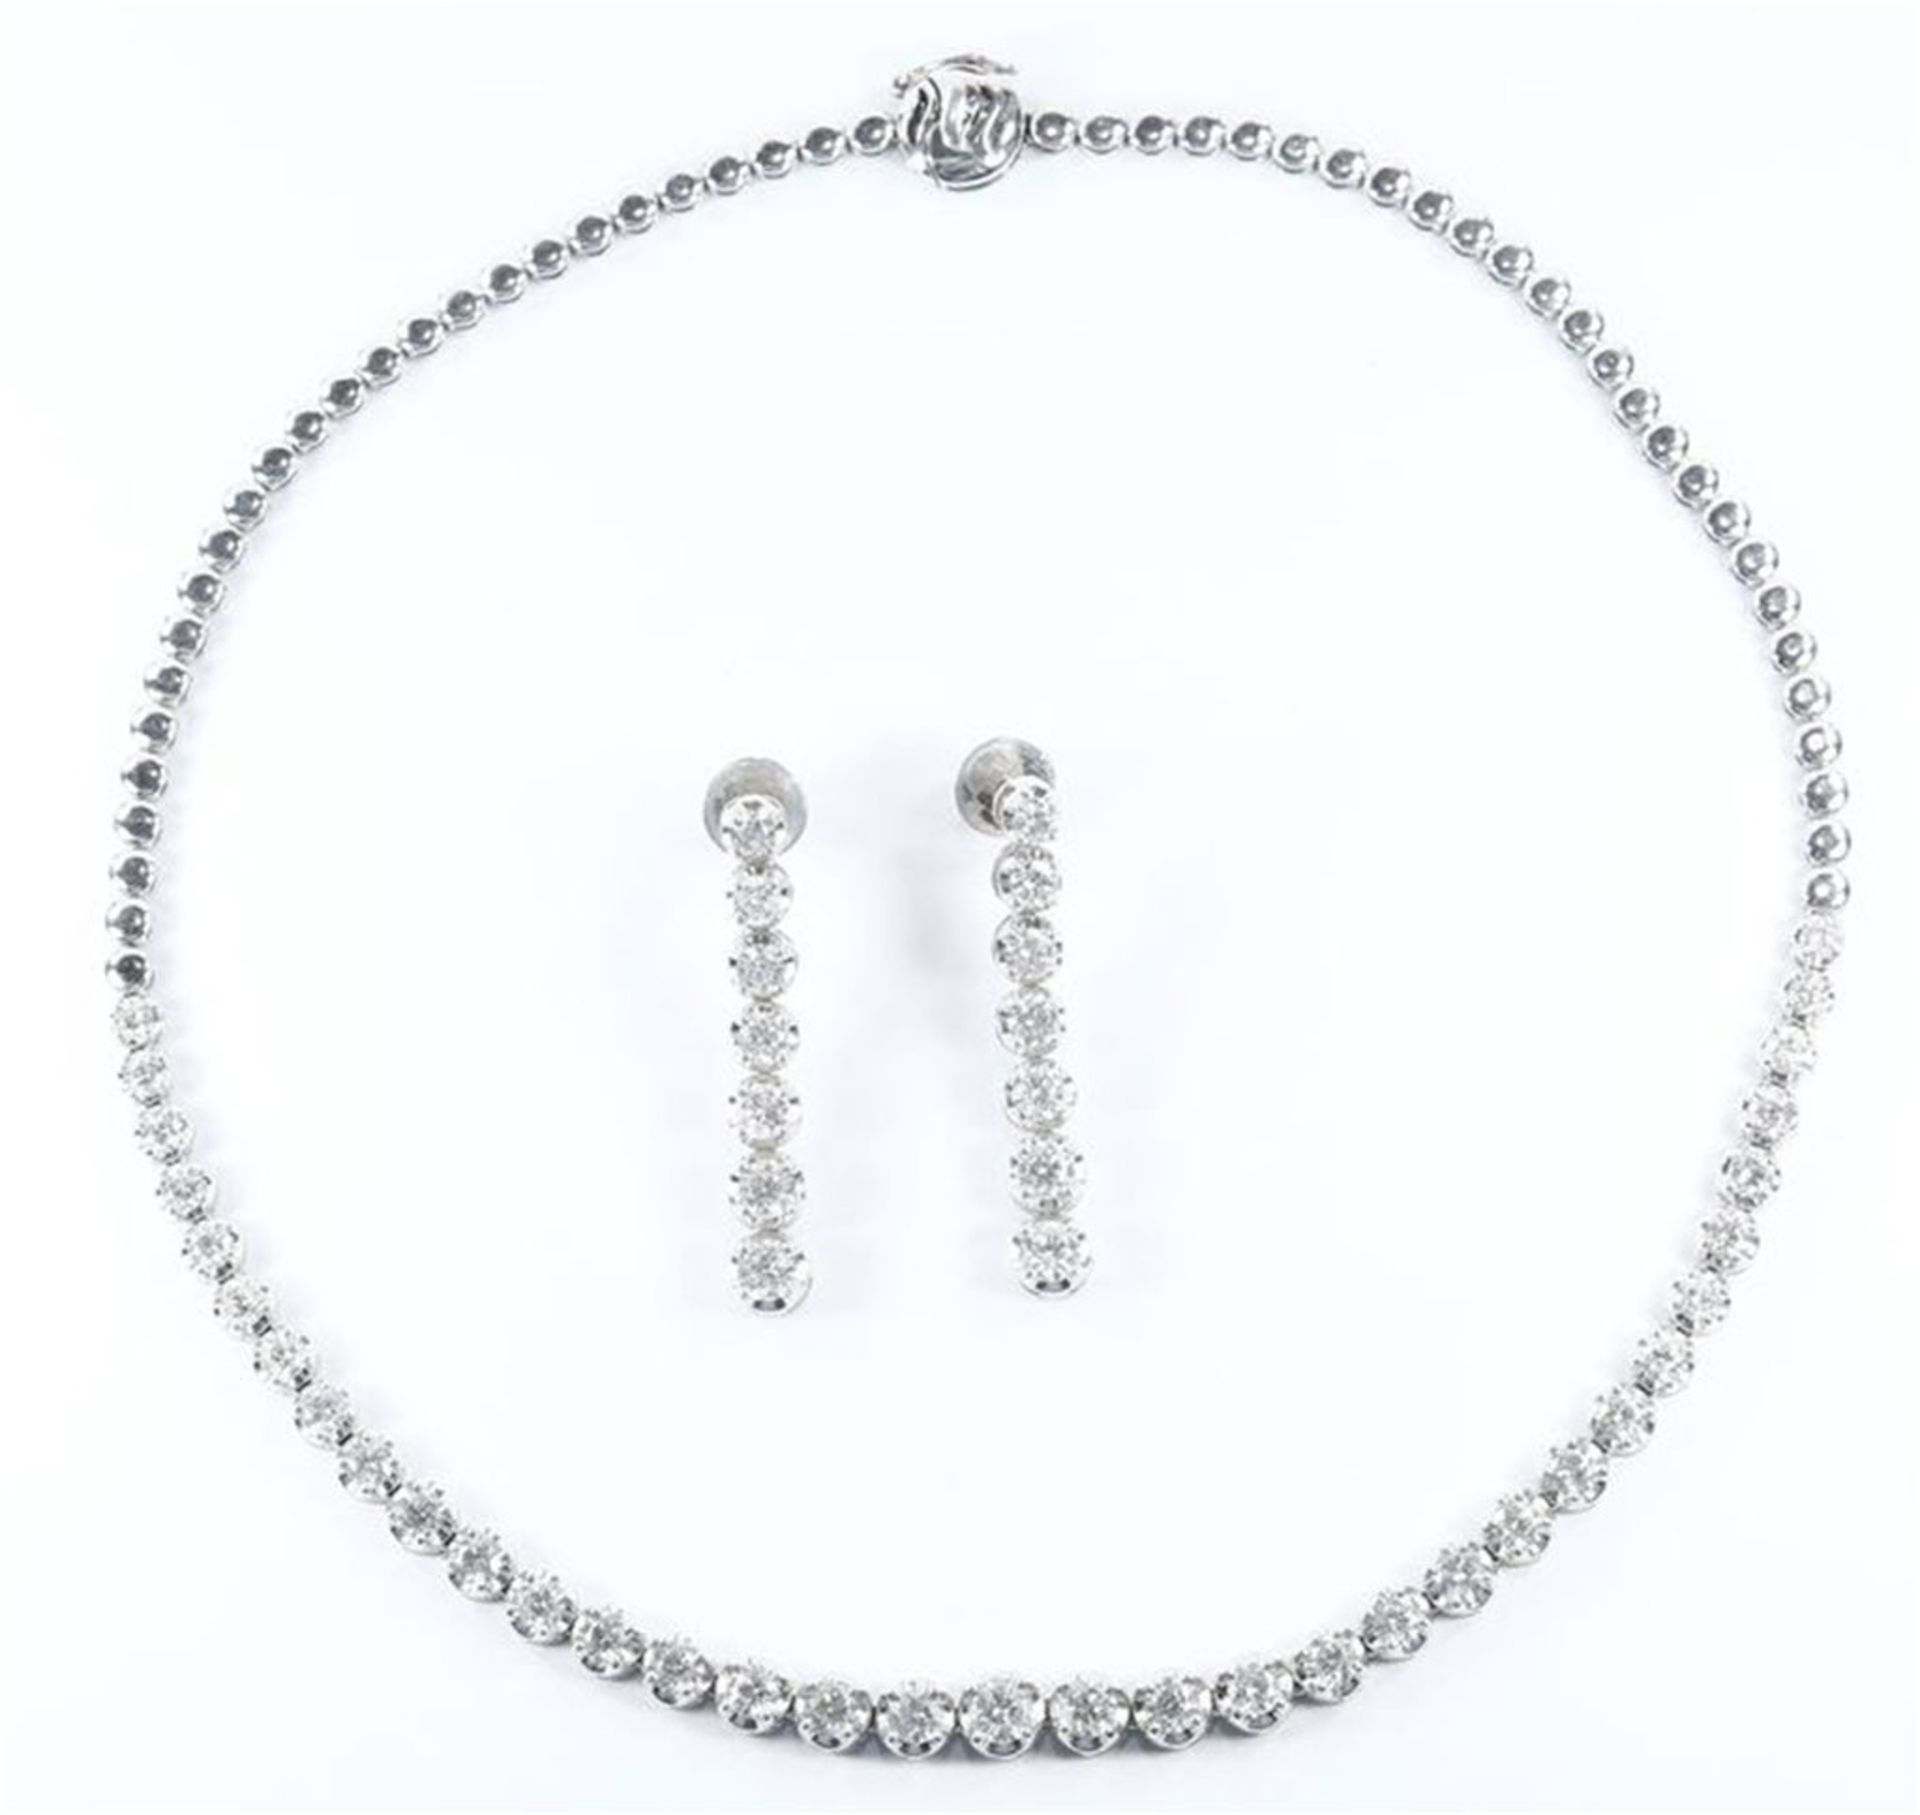 IGI Certified 14.83 ct. Solitaire Diamonds String Necklace with matching Diamond Drop Earrings - Image 2 of 4